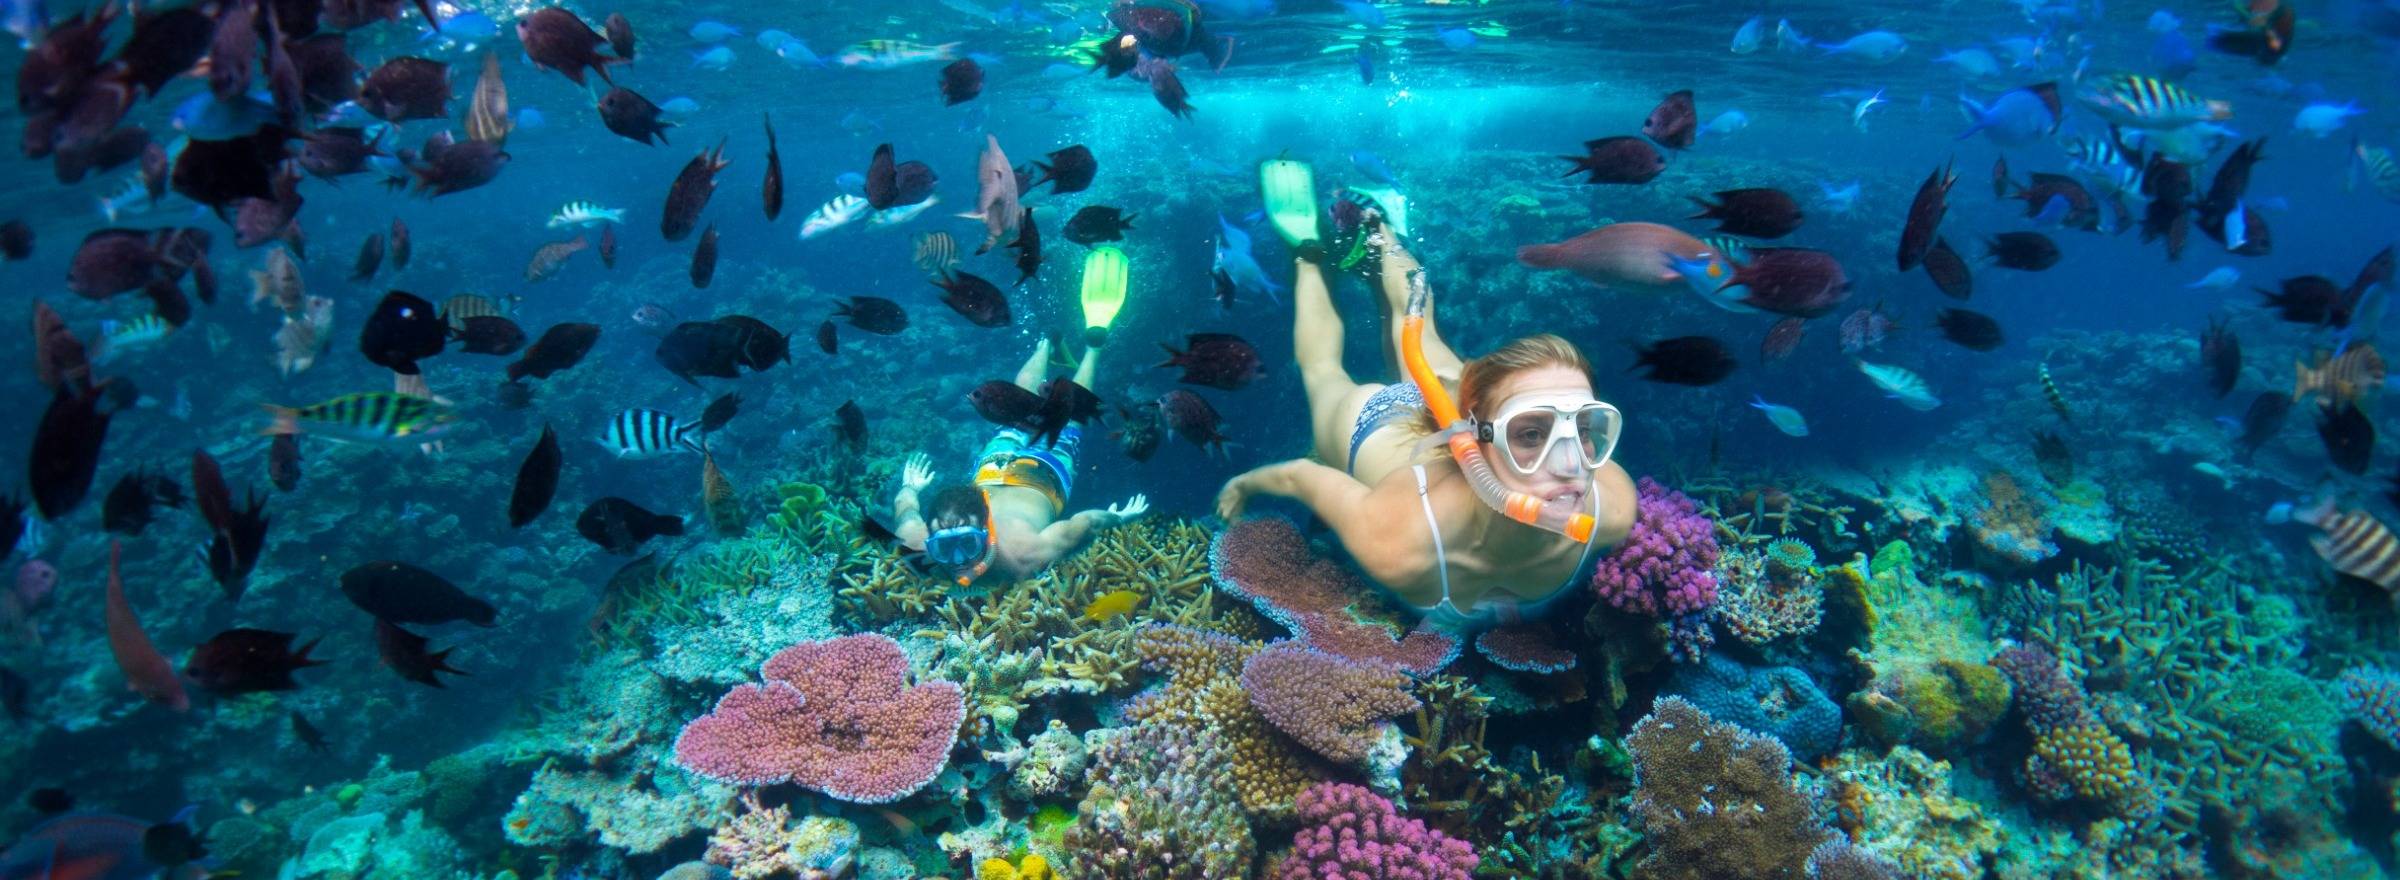 Snorkelling in the South Pacific